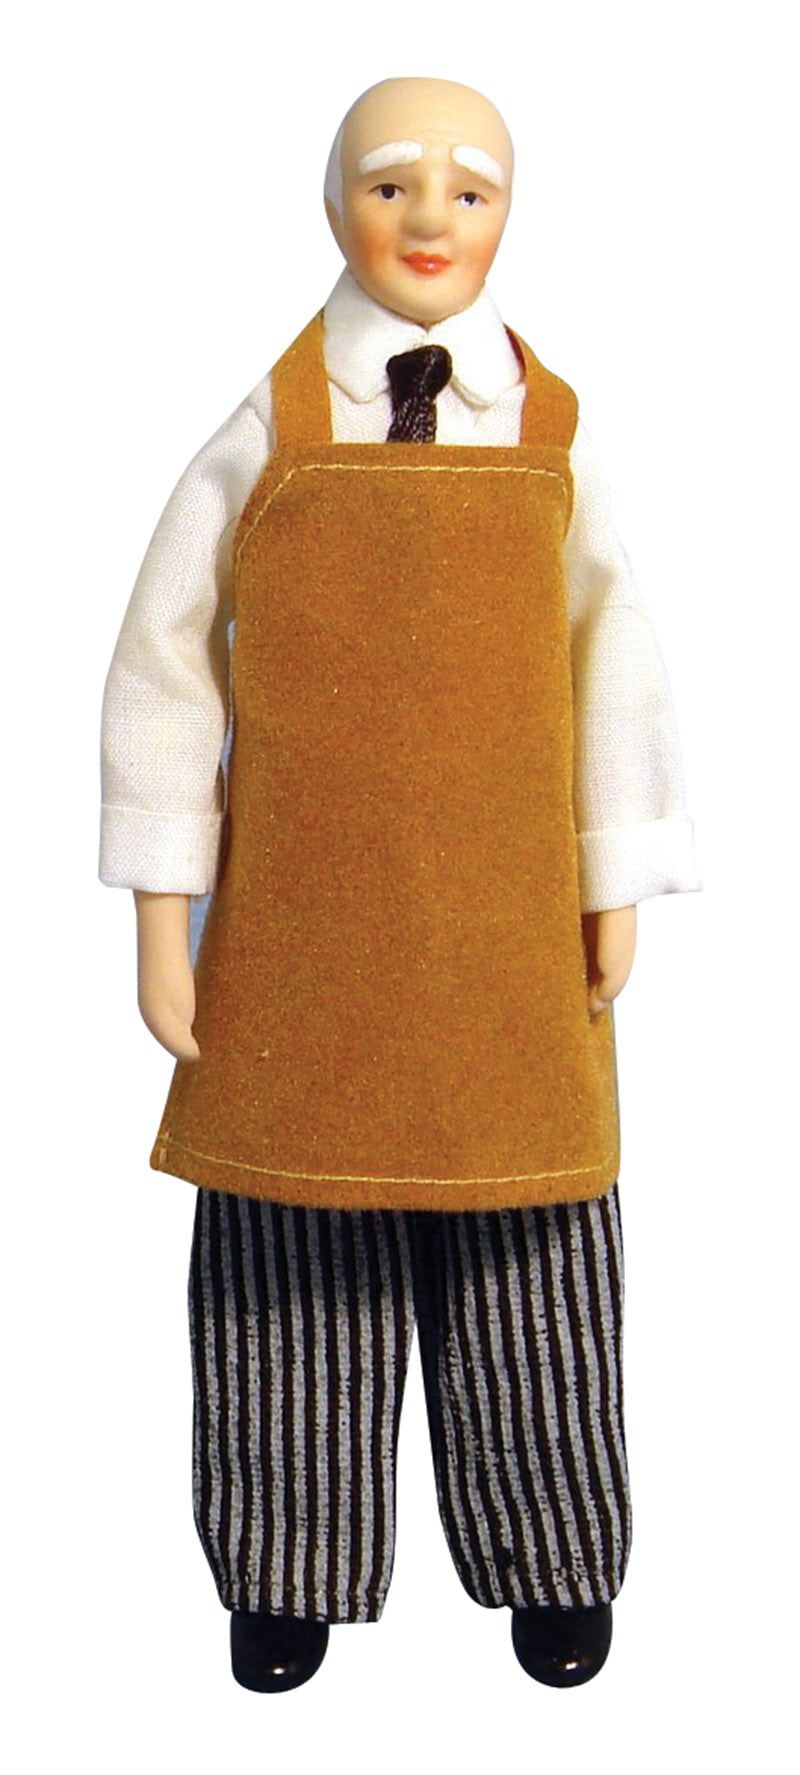 Porcelain Shop Keeper for 12th Scale Dolls House